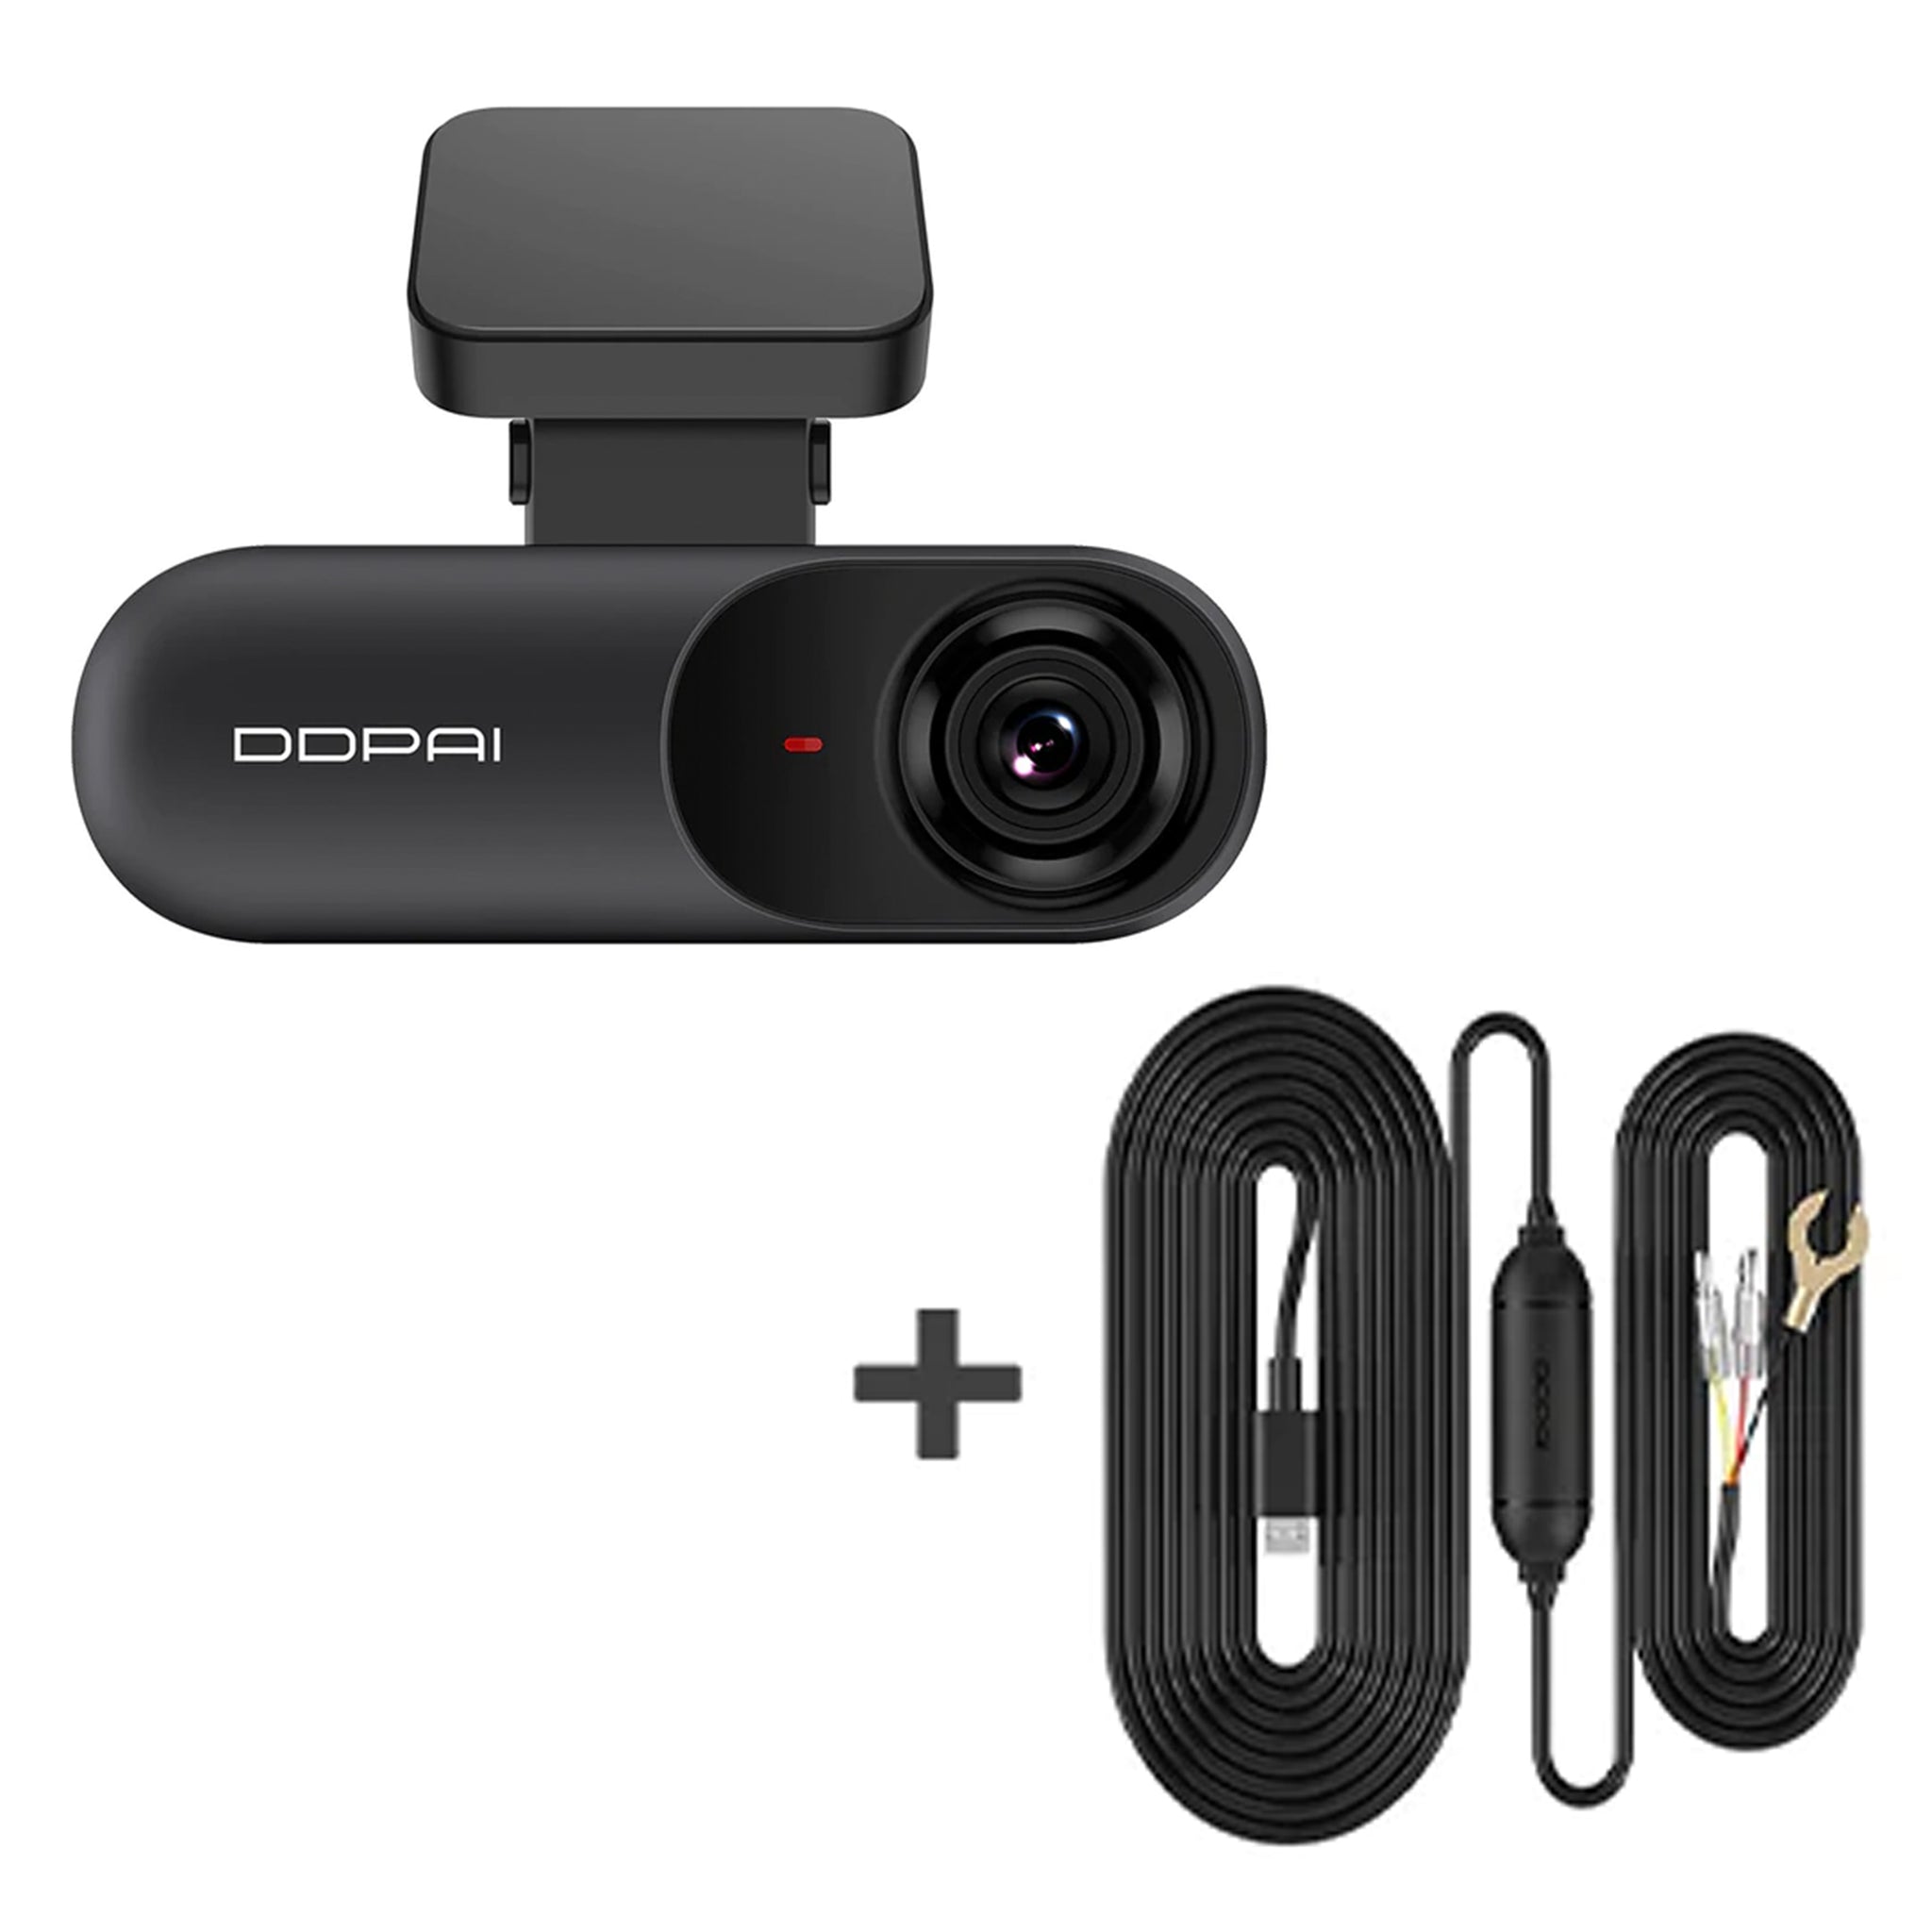 DDPAI Mola N3 Review - An Excellent Dash Cam That Doesn't Hurt Your Wallet  –